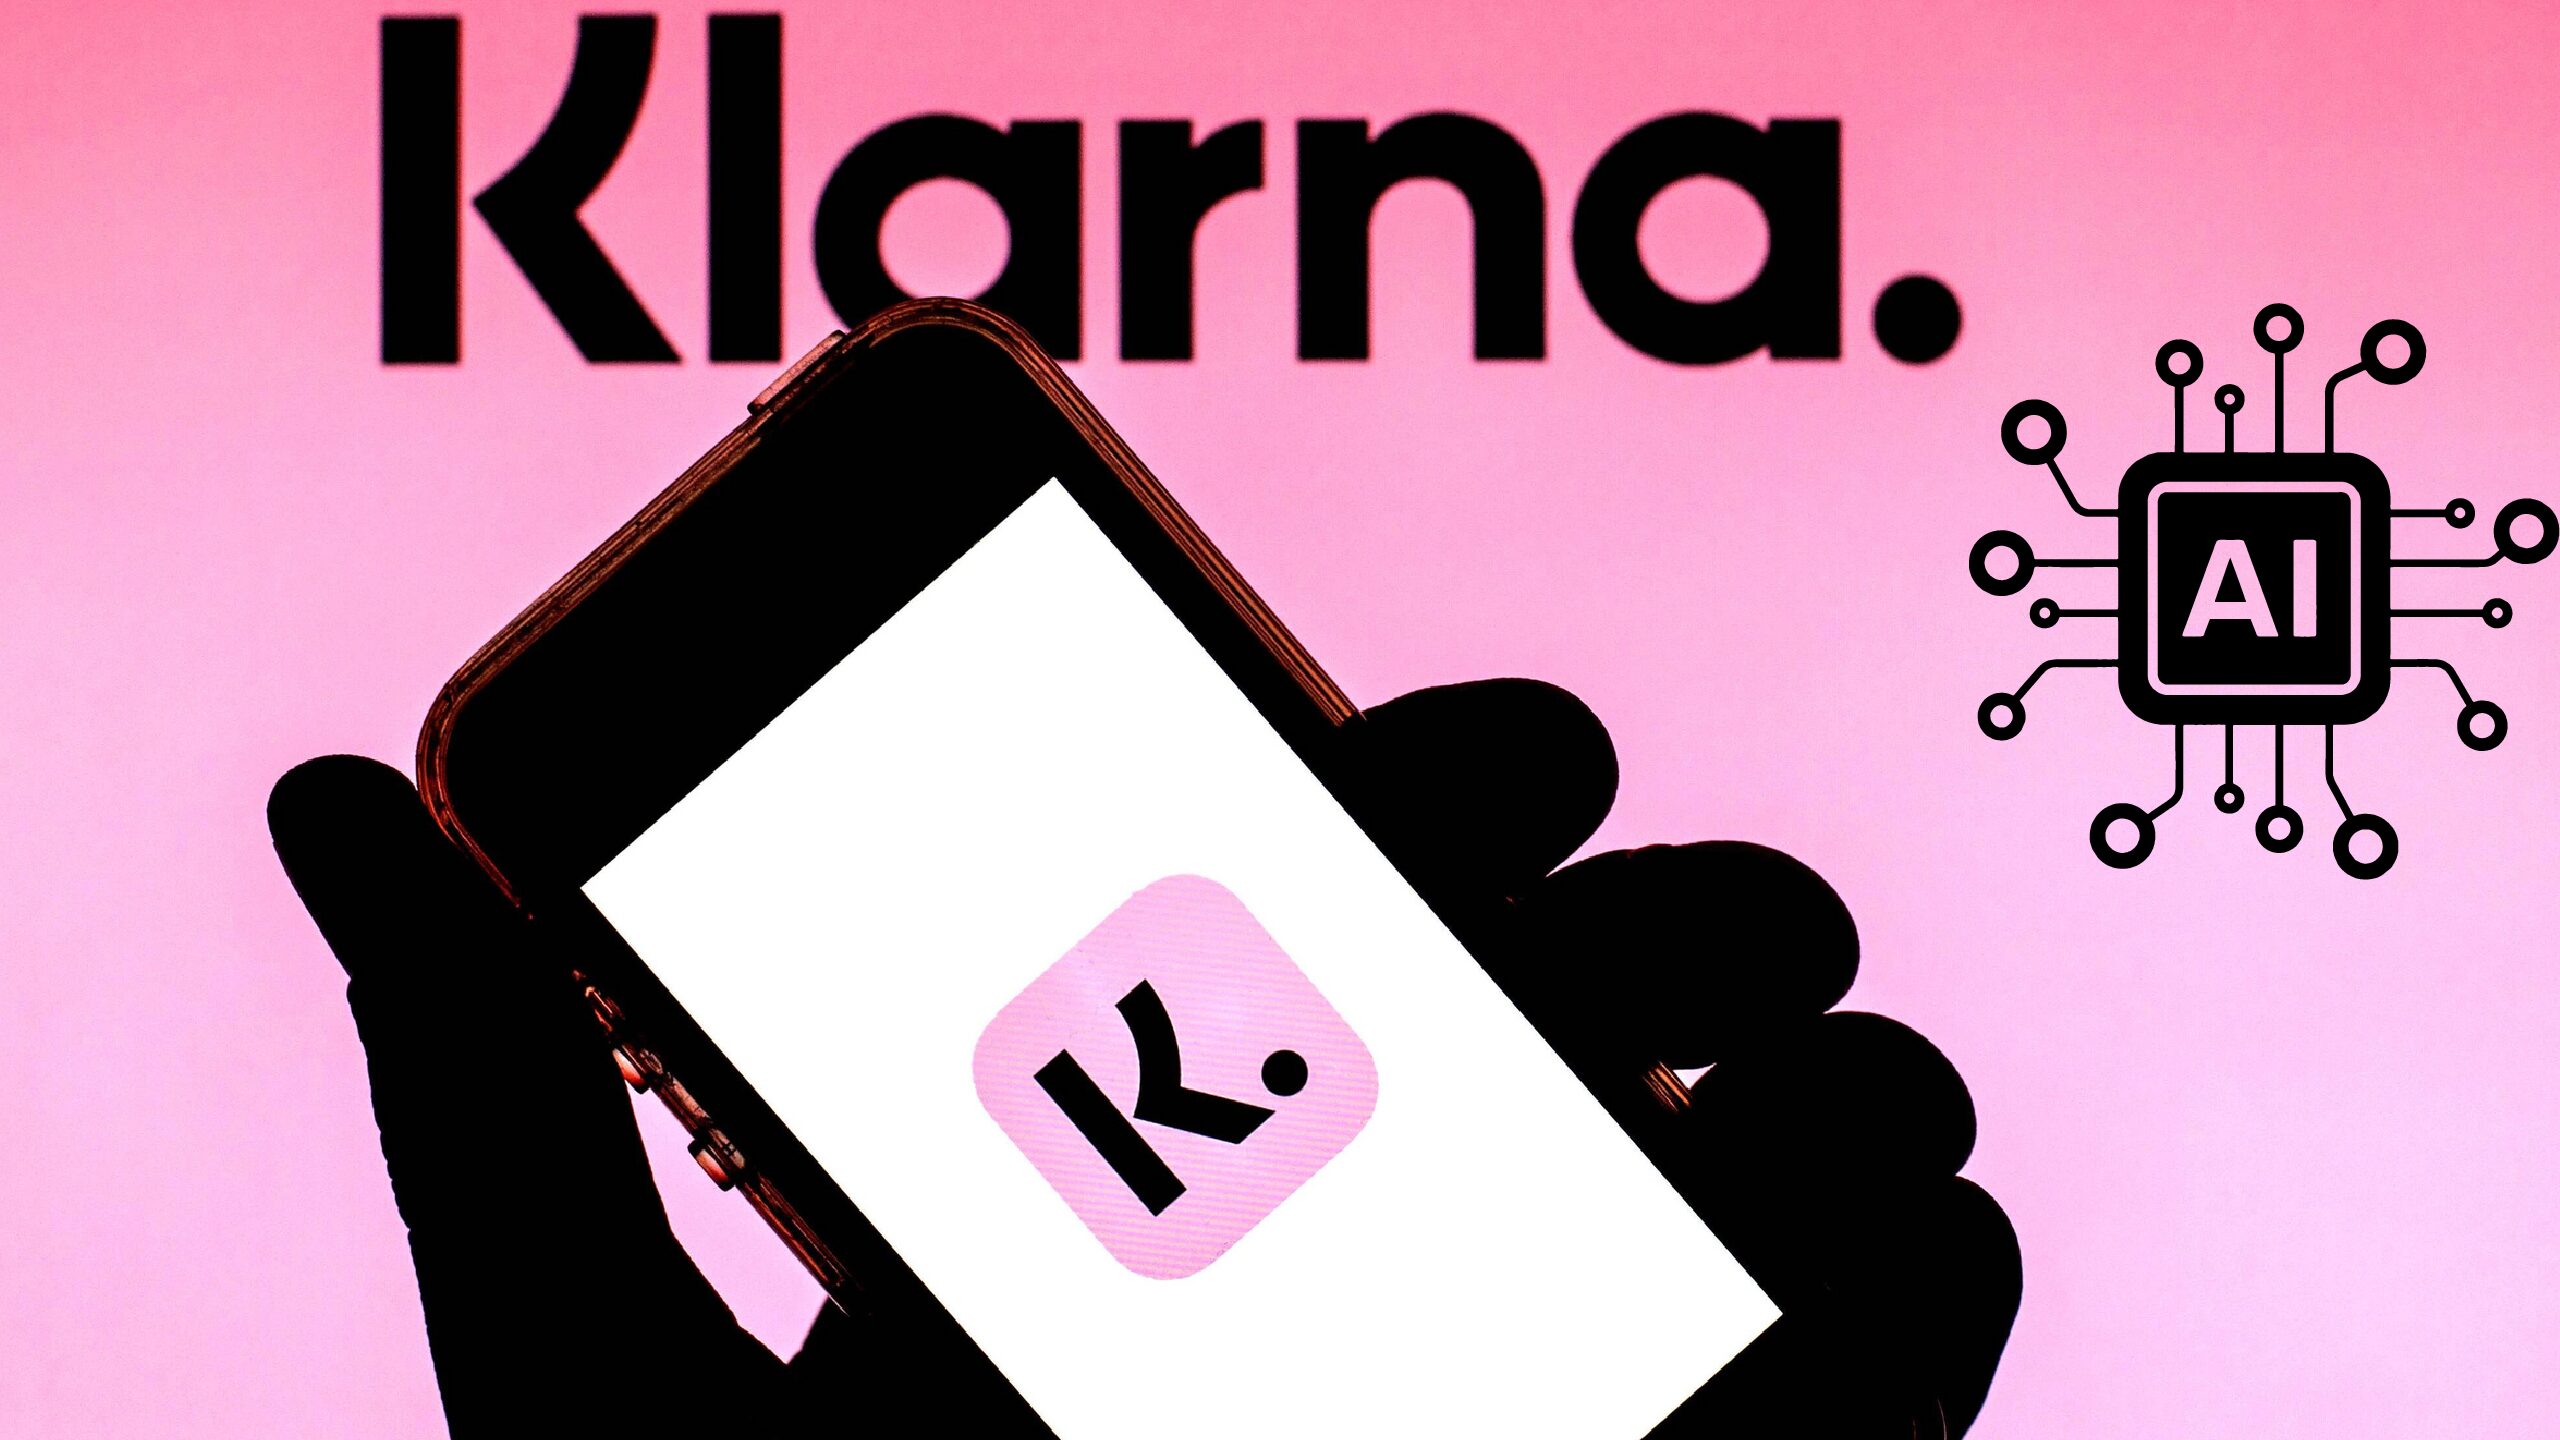 Klarna: AI chatbot Replaces Work of 700 Employees, Saves 40 Million Dollars